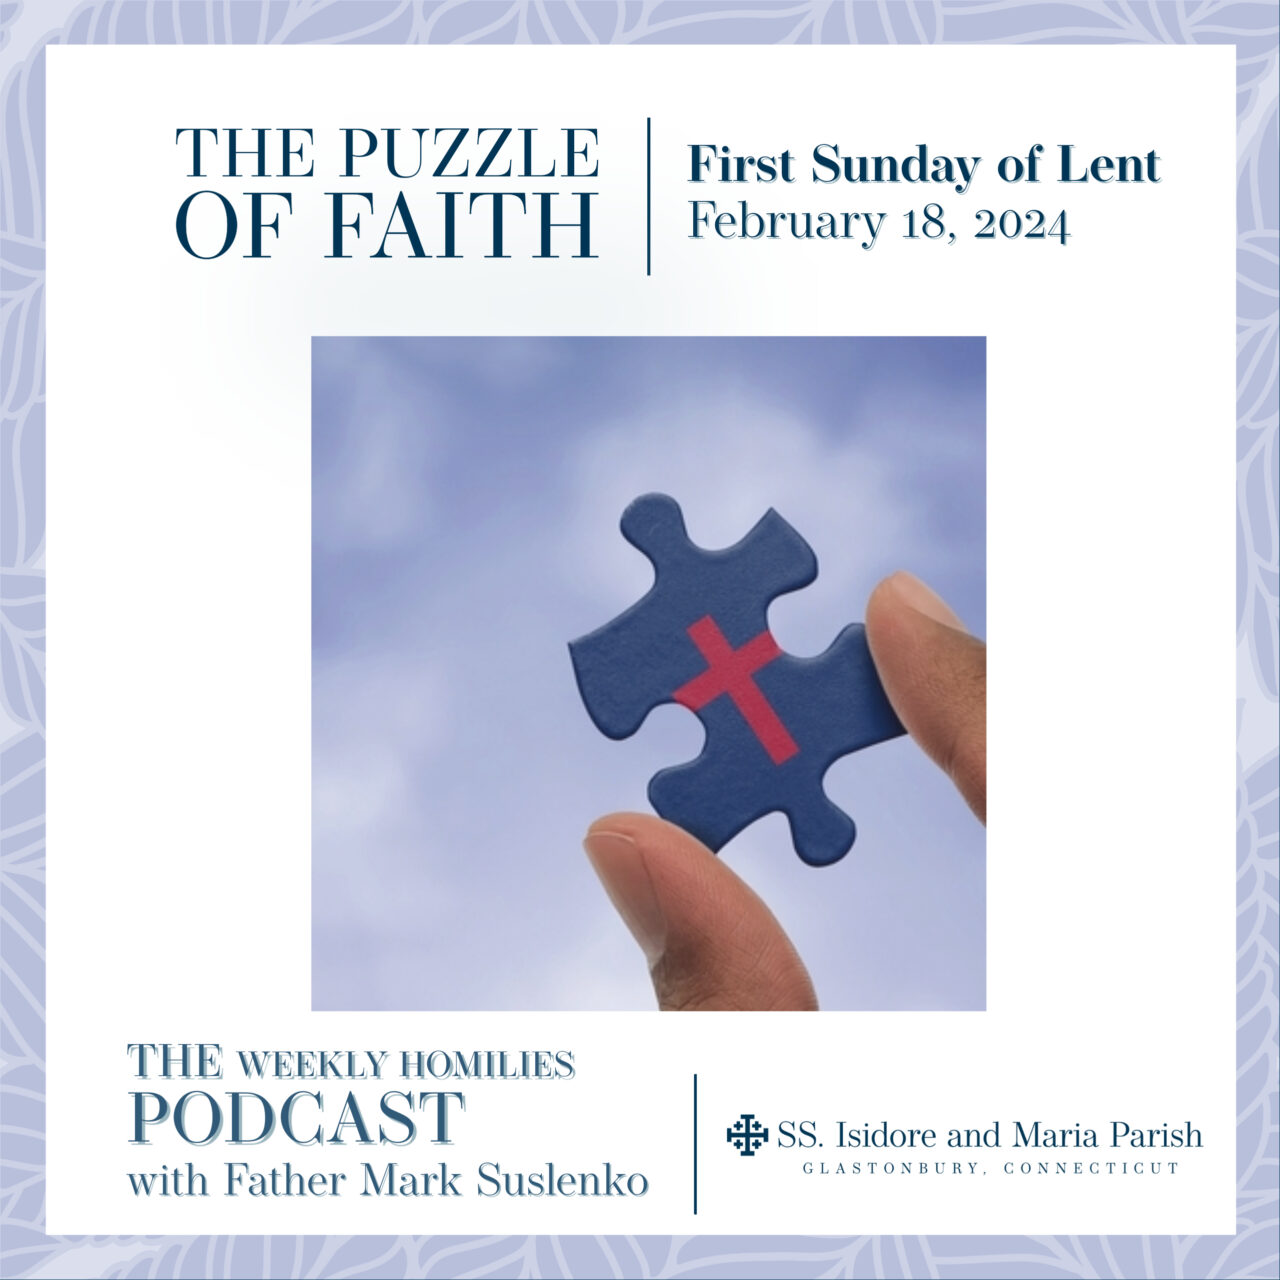 PODCAST: The Puzzle of Faith